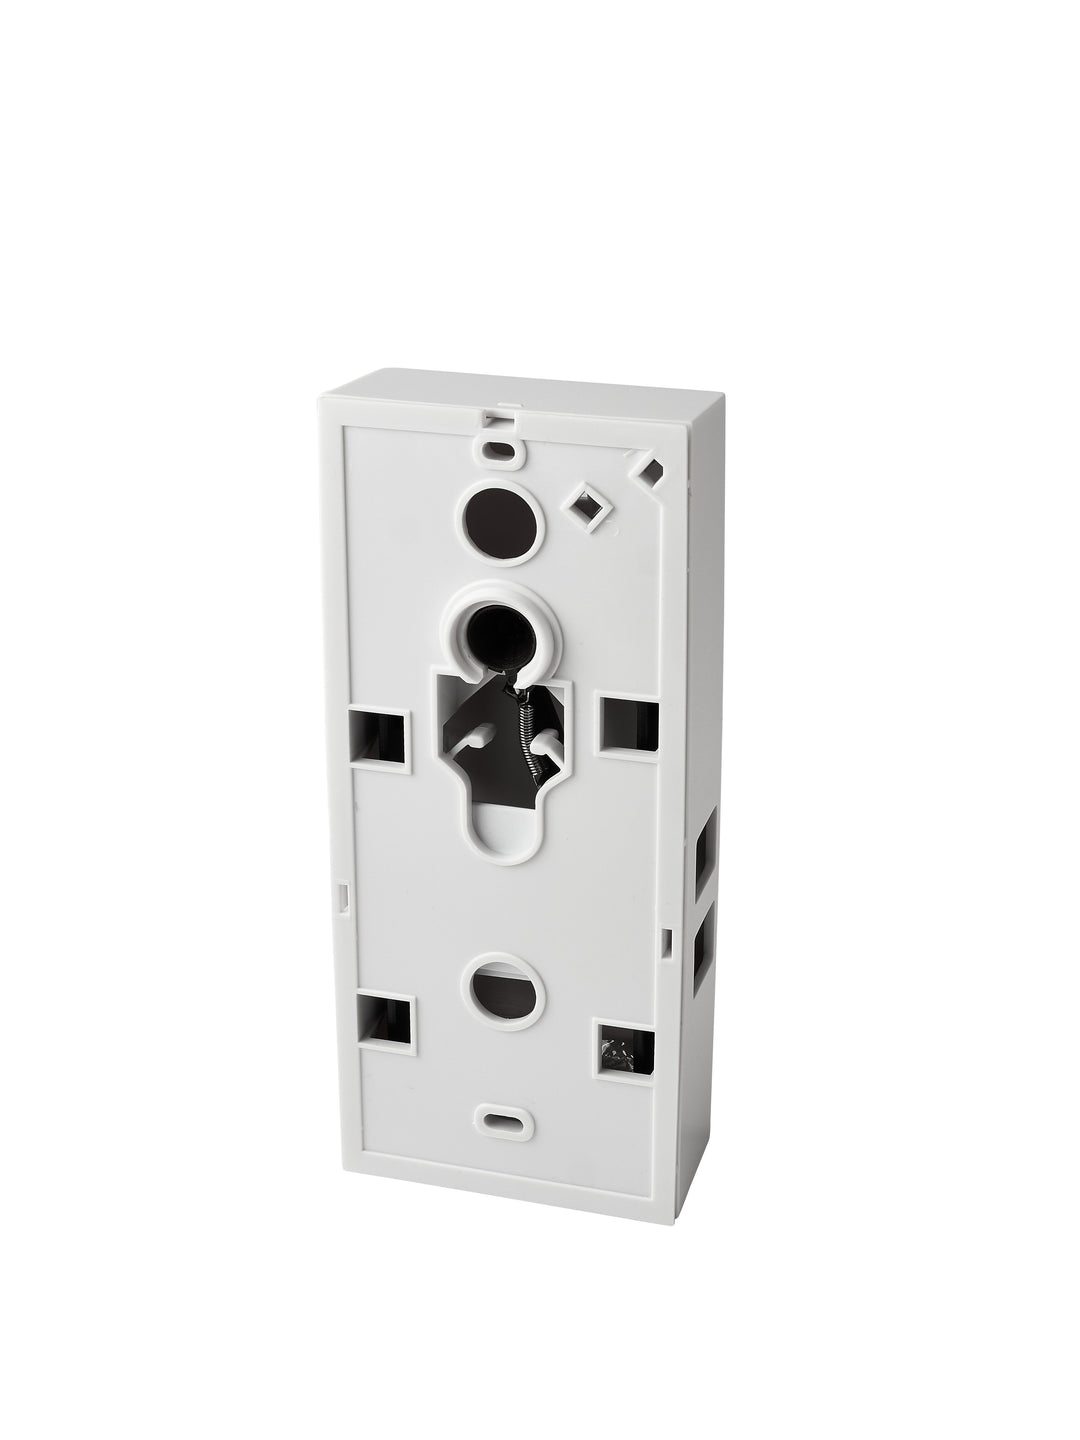 MCHBV 2-Note Mechanical Non-Electric Doorbell Chime and Doorbell Push Button with Built-In Door Viewer